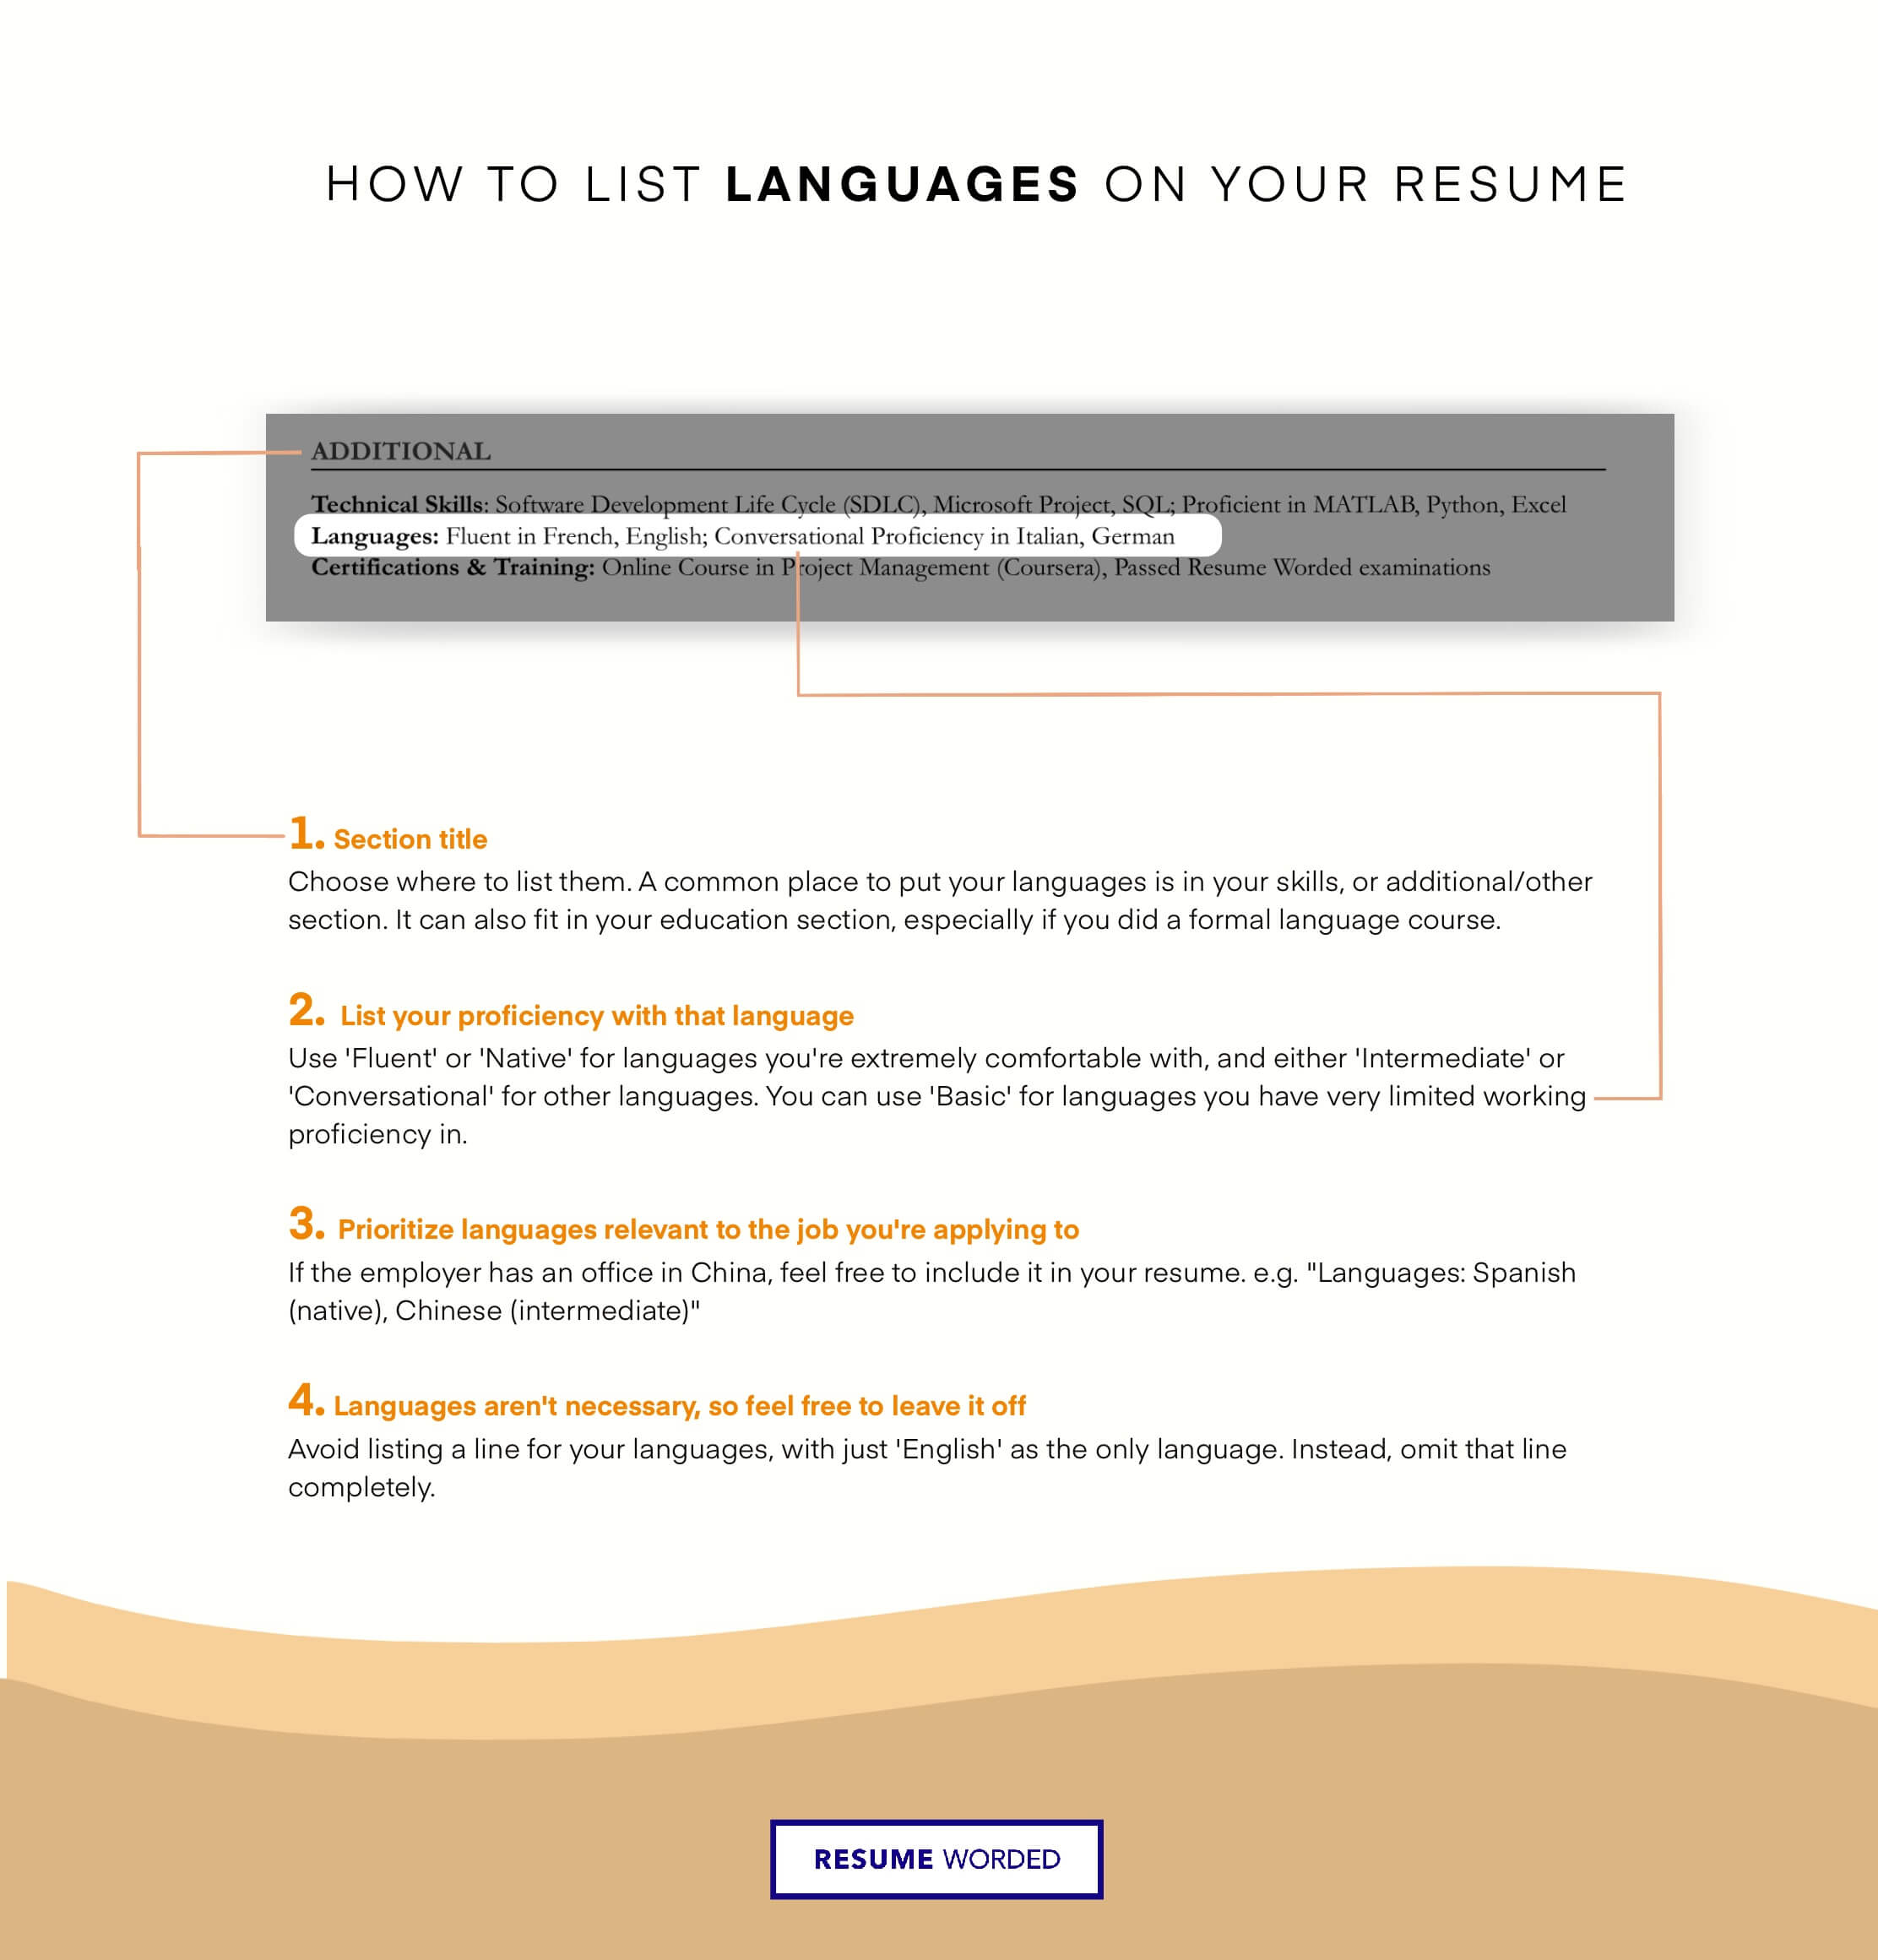 Showcase the breadth of your coding language knowledge on your resume - Software Engineer Resume